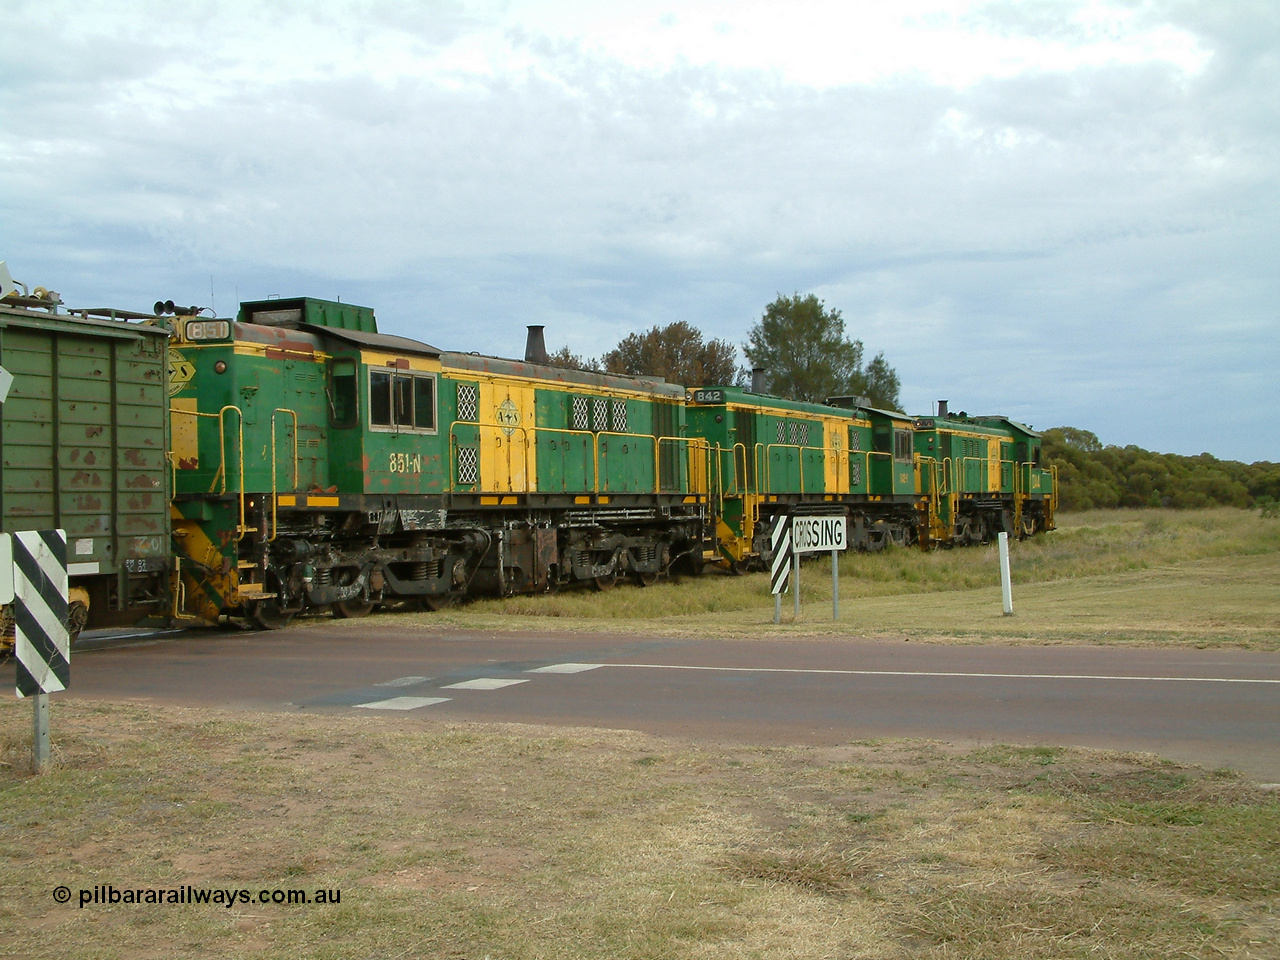 030407 082730
Wudinna, empty grain train shunts back across Gooch Tce grade crossing with a trio of former Australian National locomotives with rebuilt former AE Goodwin ALCo model DL531 830 class ex 839, serial 83730, rebuilt by Port Augusta Workshops to DA class, DA 4 leading two AE Goodwin ALCo model DL531 830 class units 842, serial 84140 and 851 serial 84137, 851 having been on the Eyre Peninsula since delivered in 1962. 7th April 2003.
Keywords: 830-class;851;84137;AE-Goodwin;ALCo;DL531;